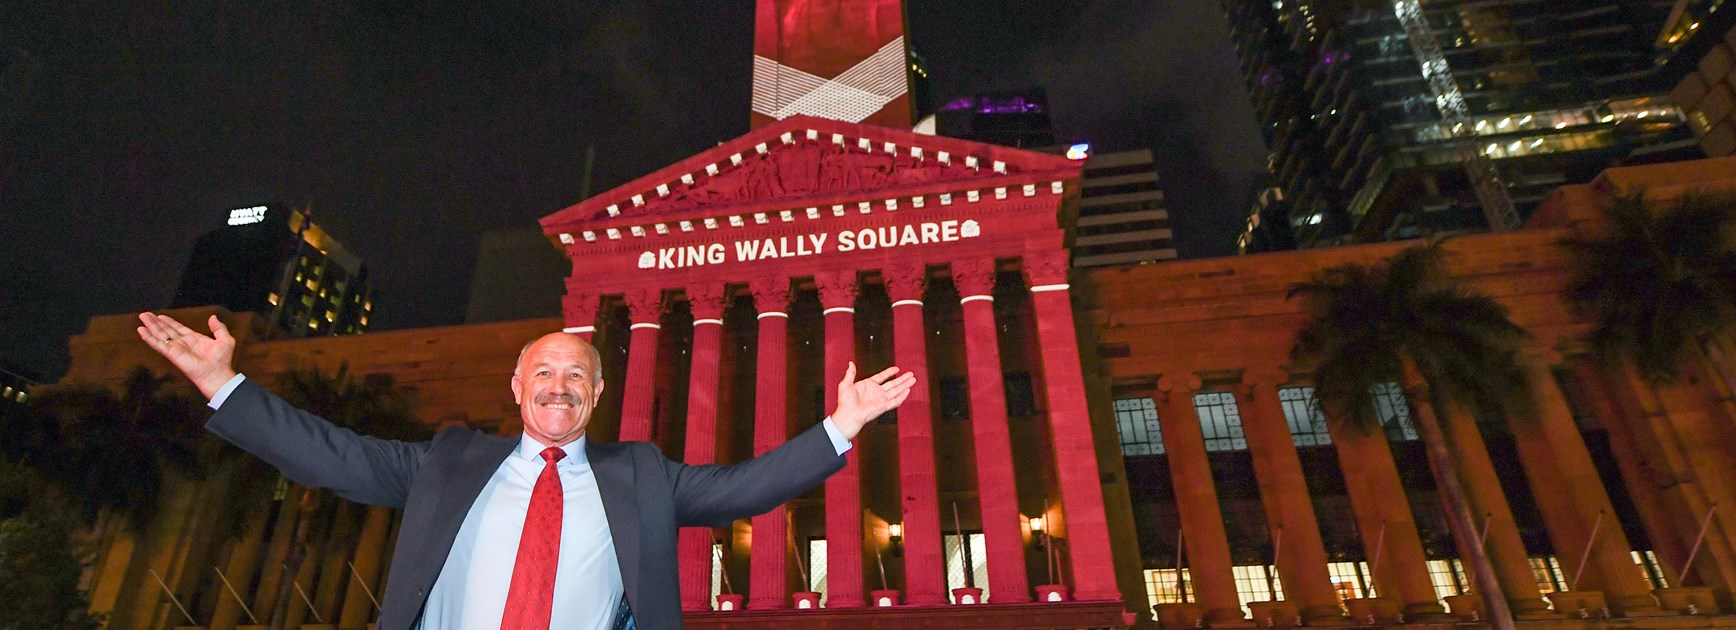 King George Square has become King Wally Square.